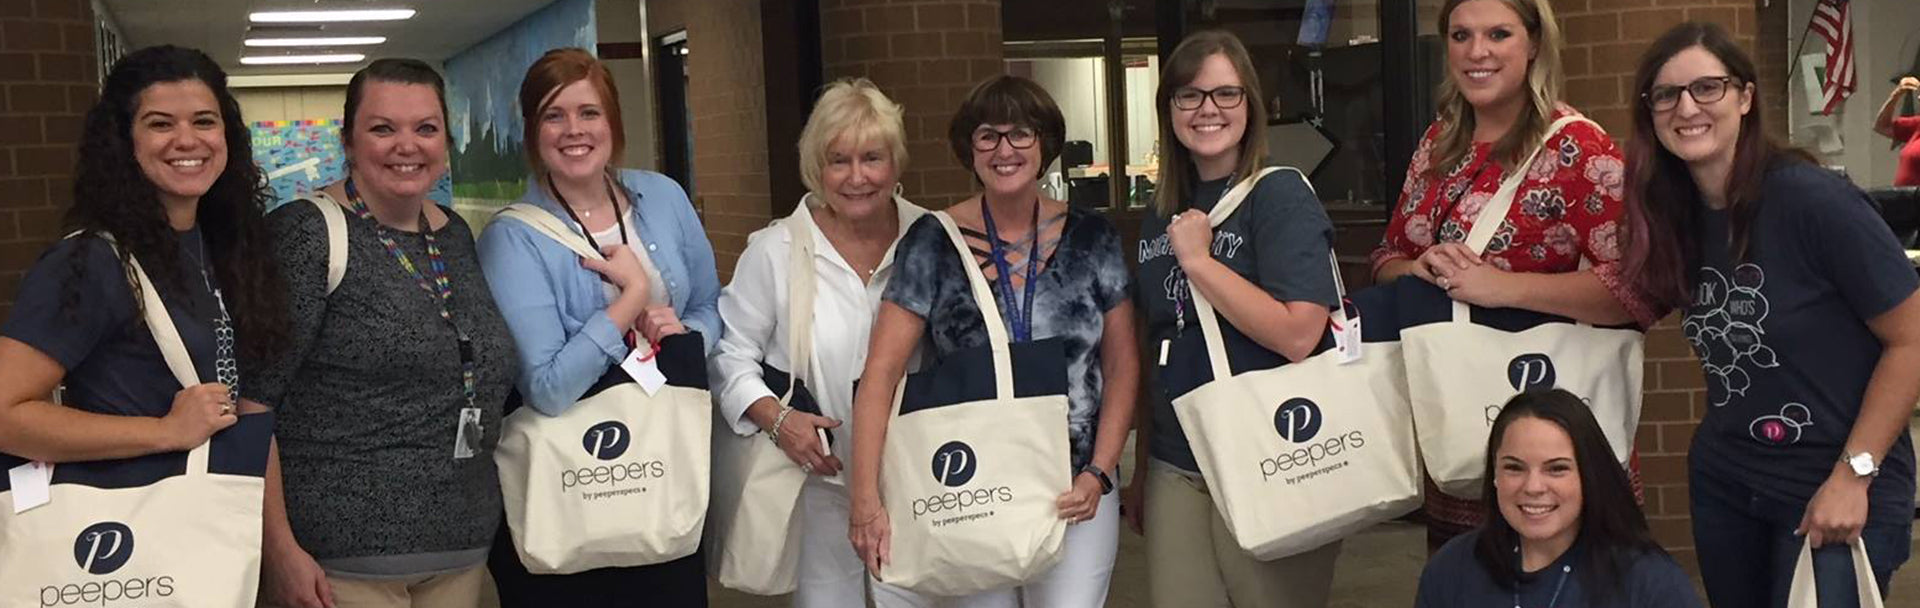 Largest image in Peepers For Teachers: August 2018 Tote Donation